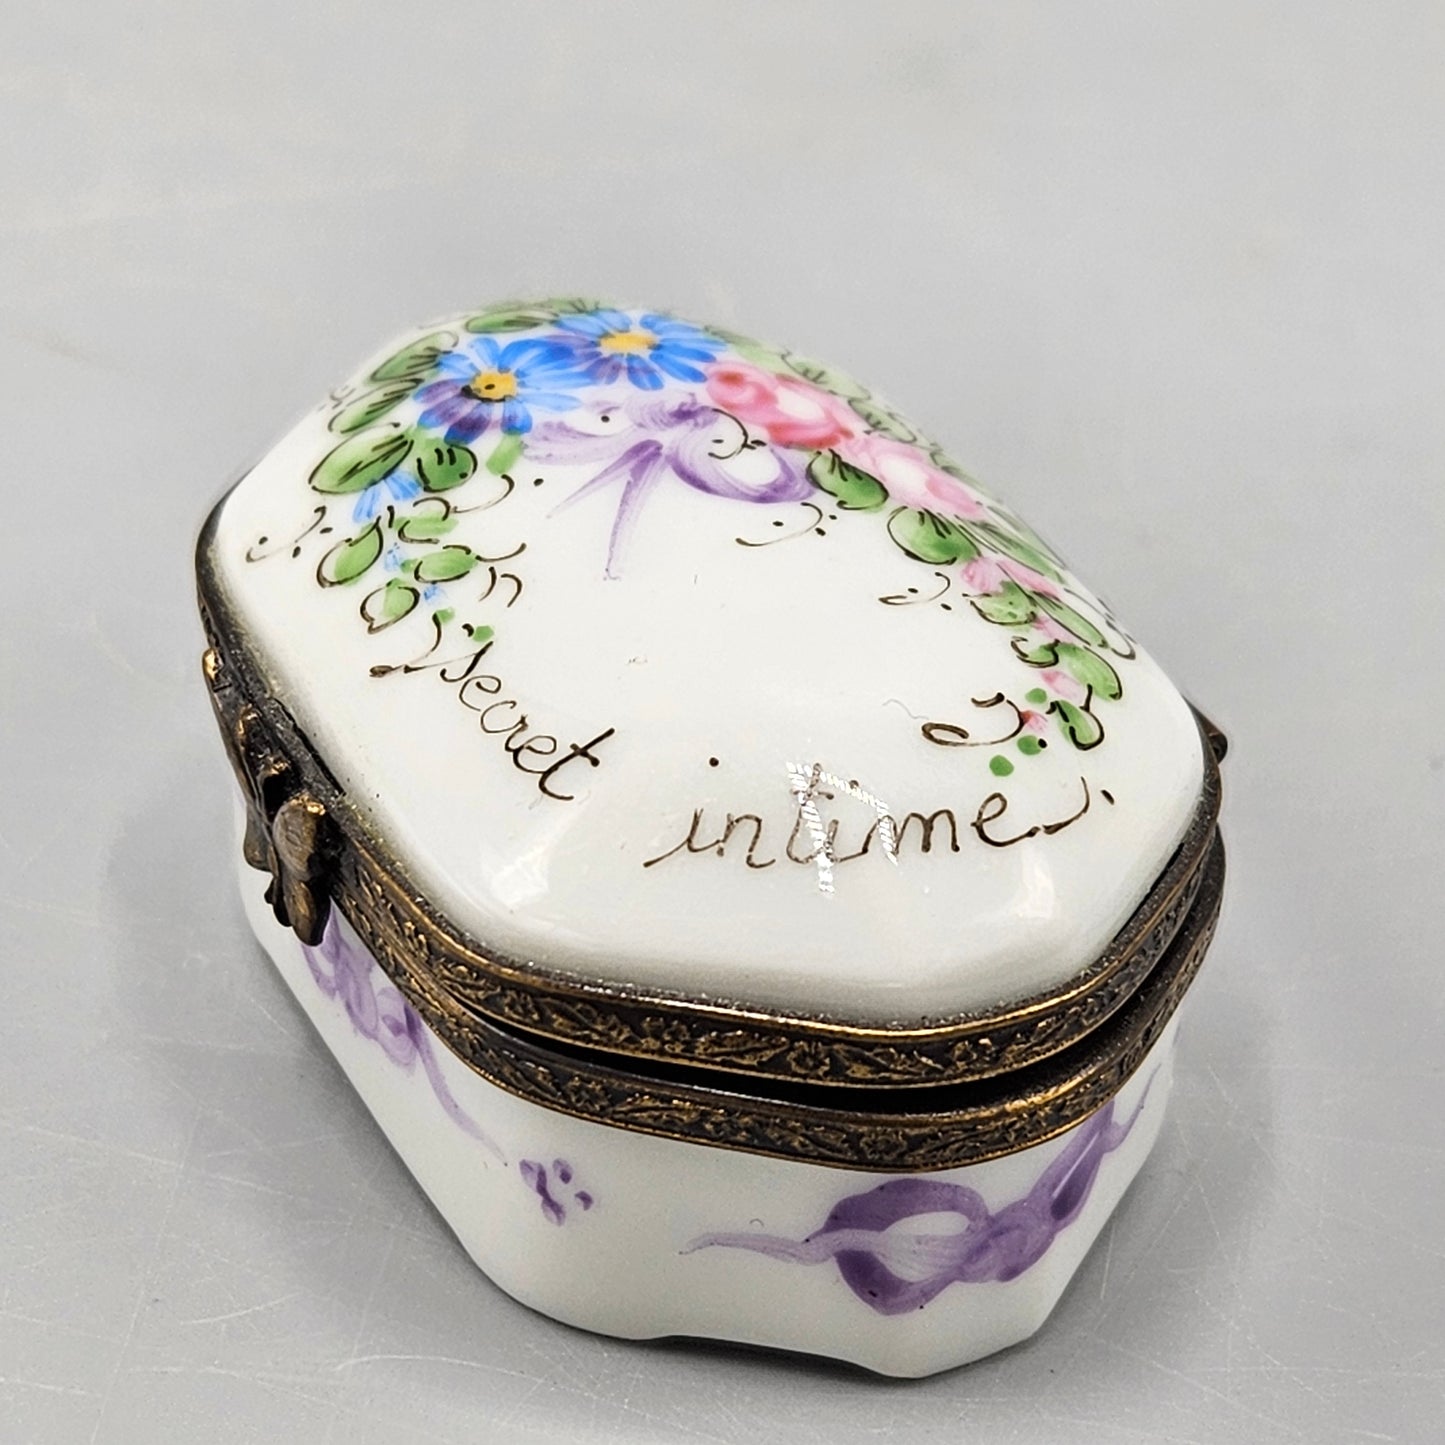 Hand Painted Limoges Porcelain Box with Violets